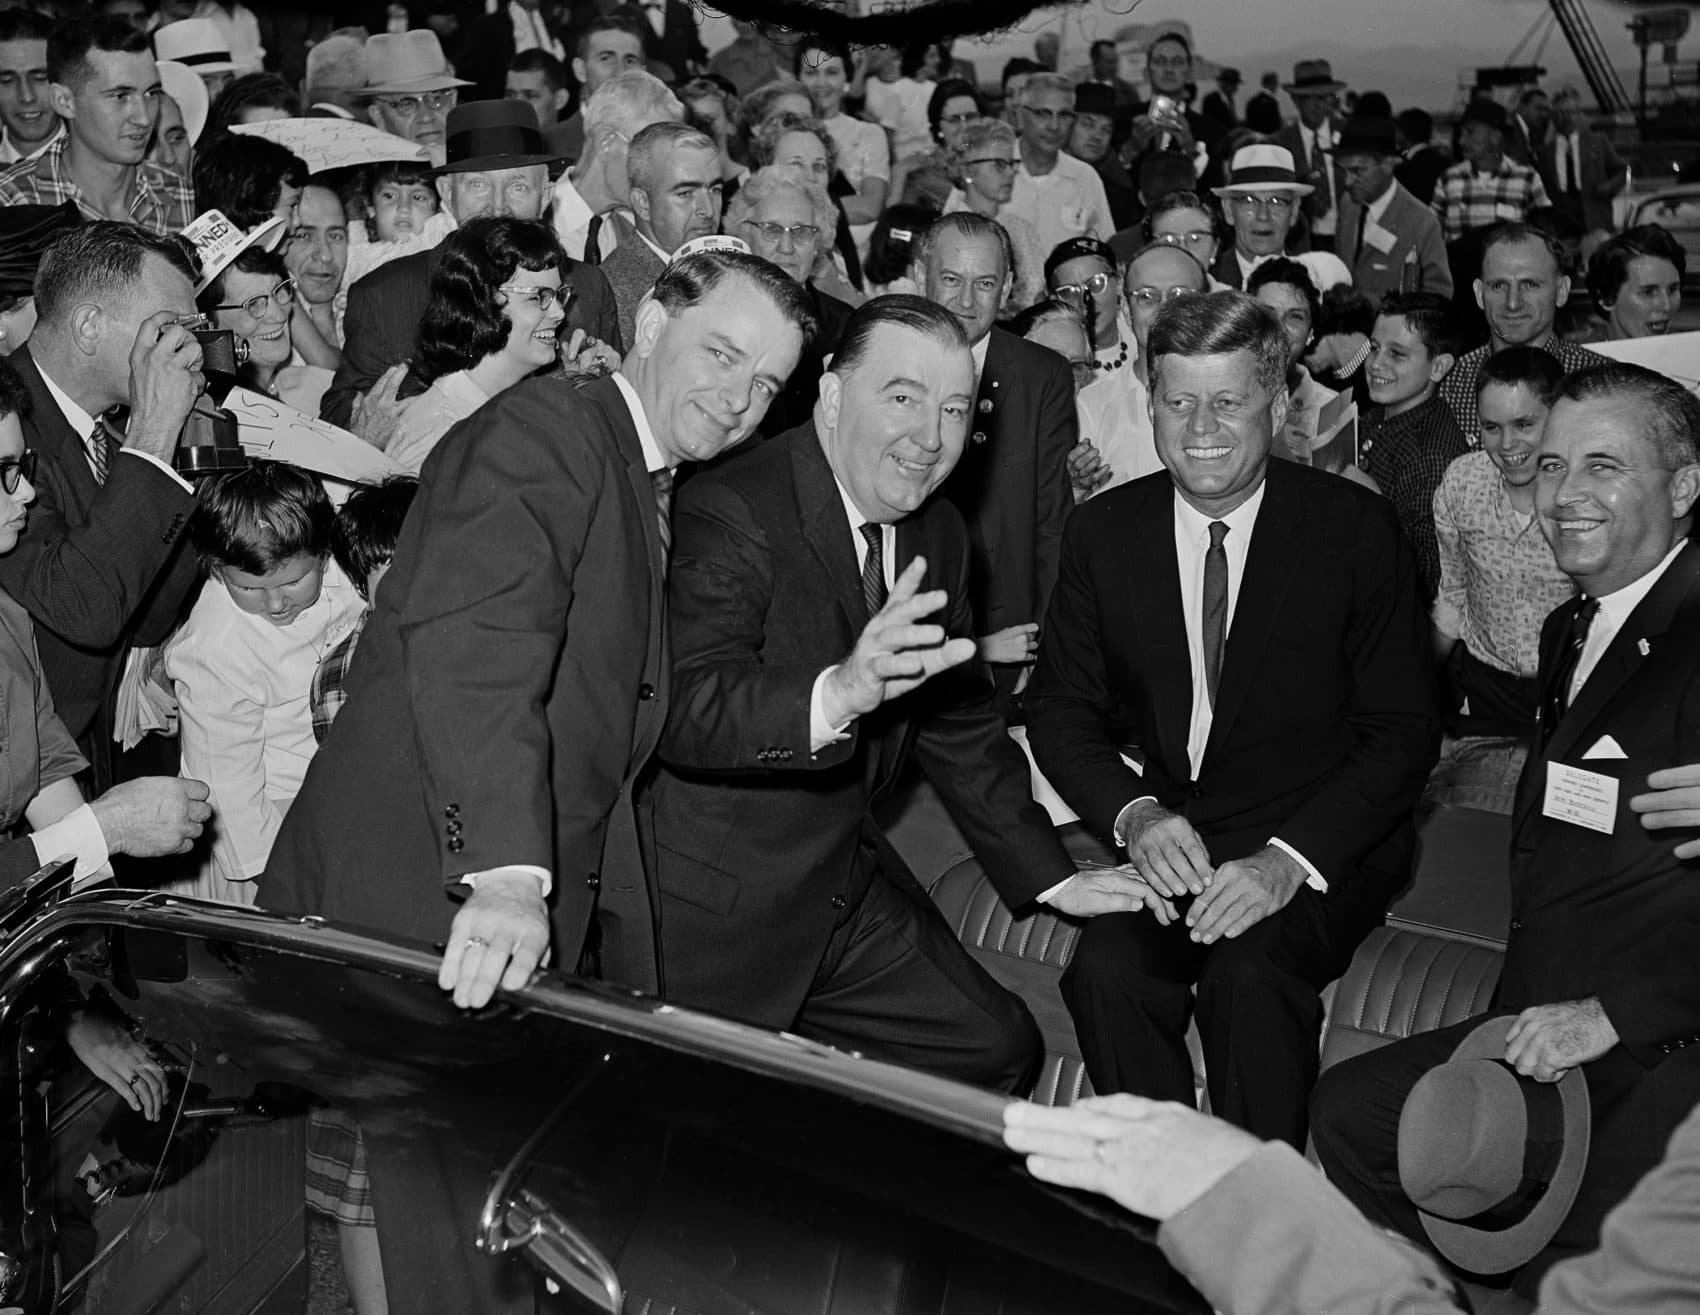 Democratic presidential hopeful Sen. John F. Kennedy, second right, is welcomed by West Virginia Senators Robert C. Byrd and Jennings Randolph, from left, and State Attorney General and Democratic nominee for governor, W.W. Barron, extreme right, as he arrives for a speaking appearance at Civic Hall in Charleston, W. Va., September 19, 1960. (AP Photo)